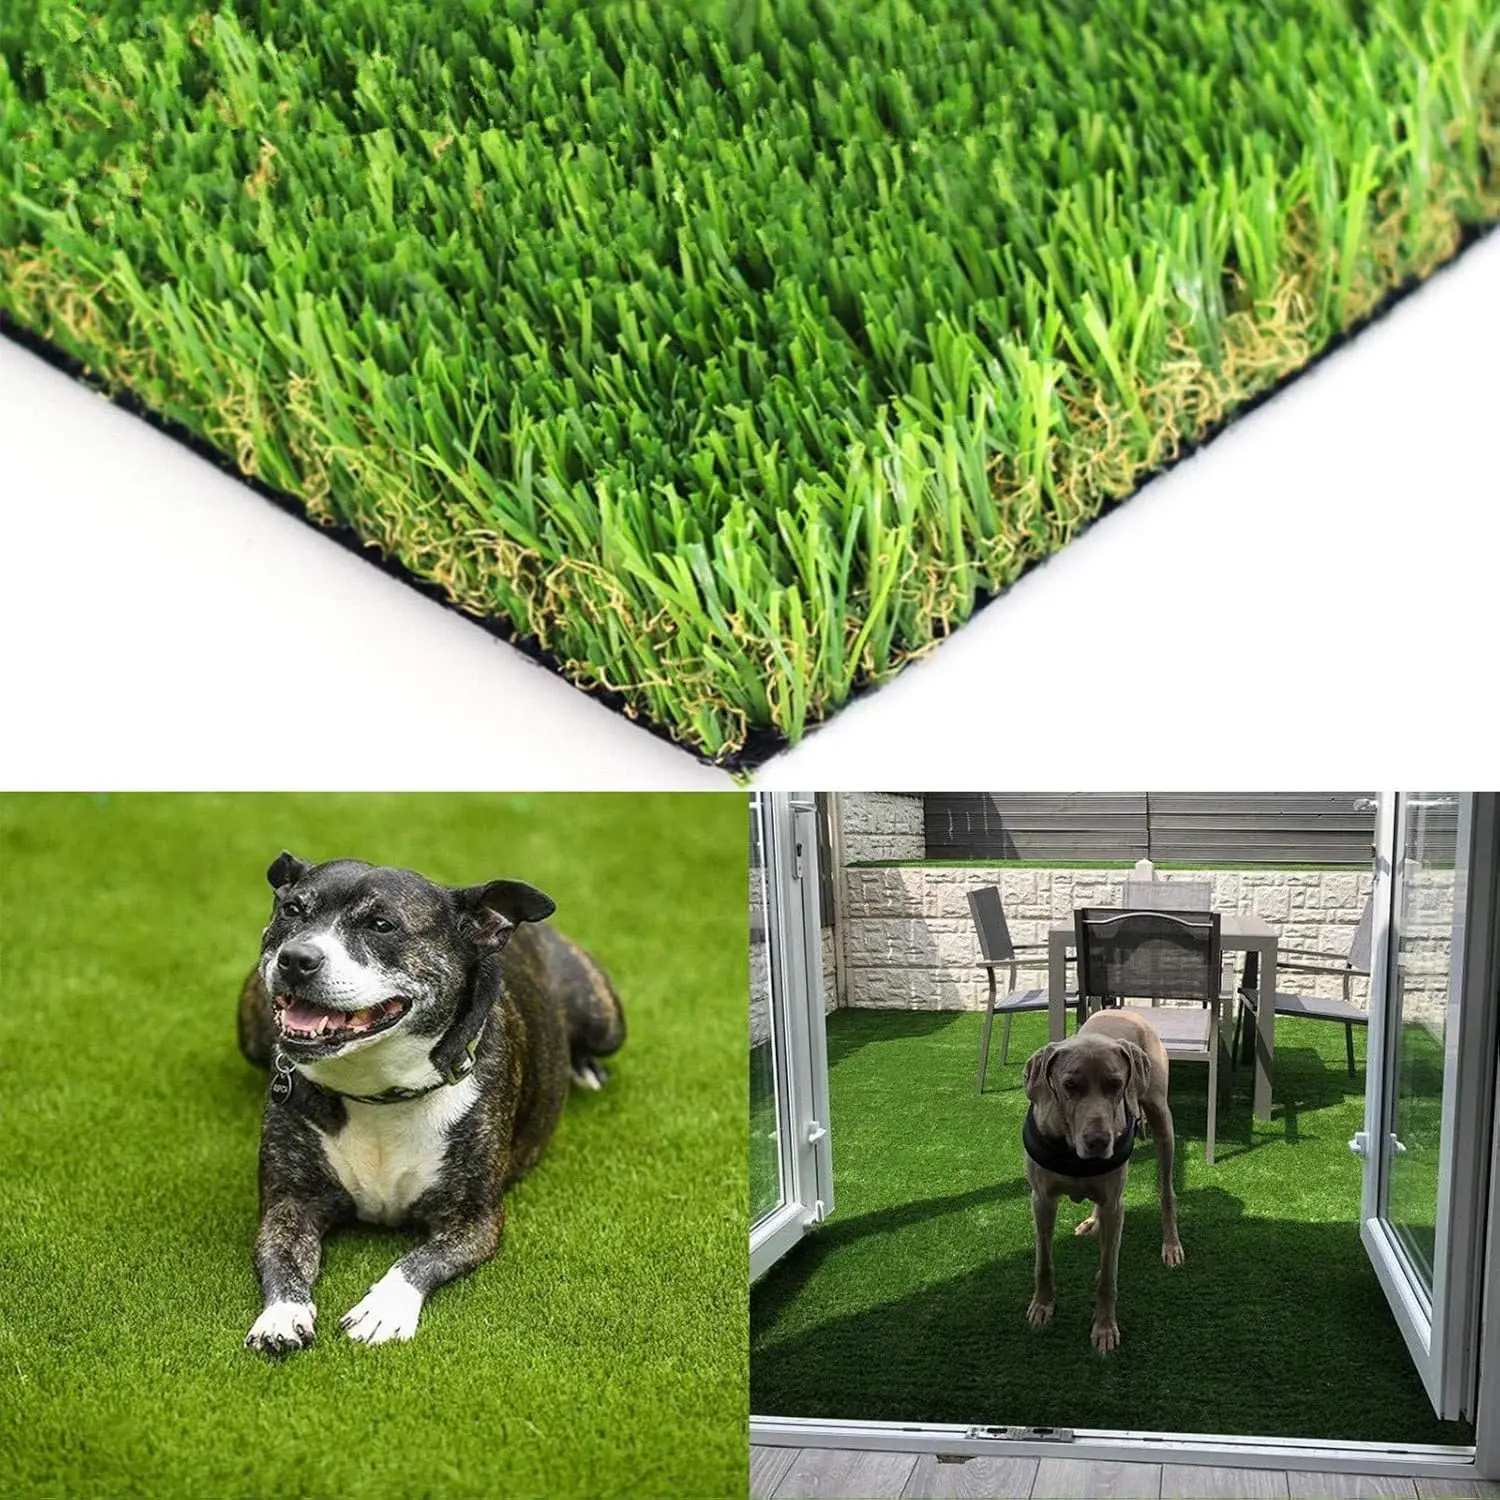 

Realistic Artificial Grass Turf - 6FTX8FT Indoor Outdoor Garden Lawn Landscape Synthetic Grass Mat